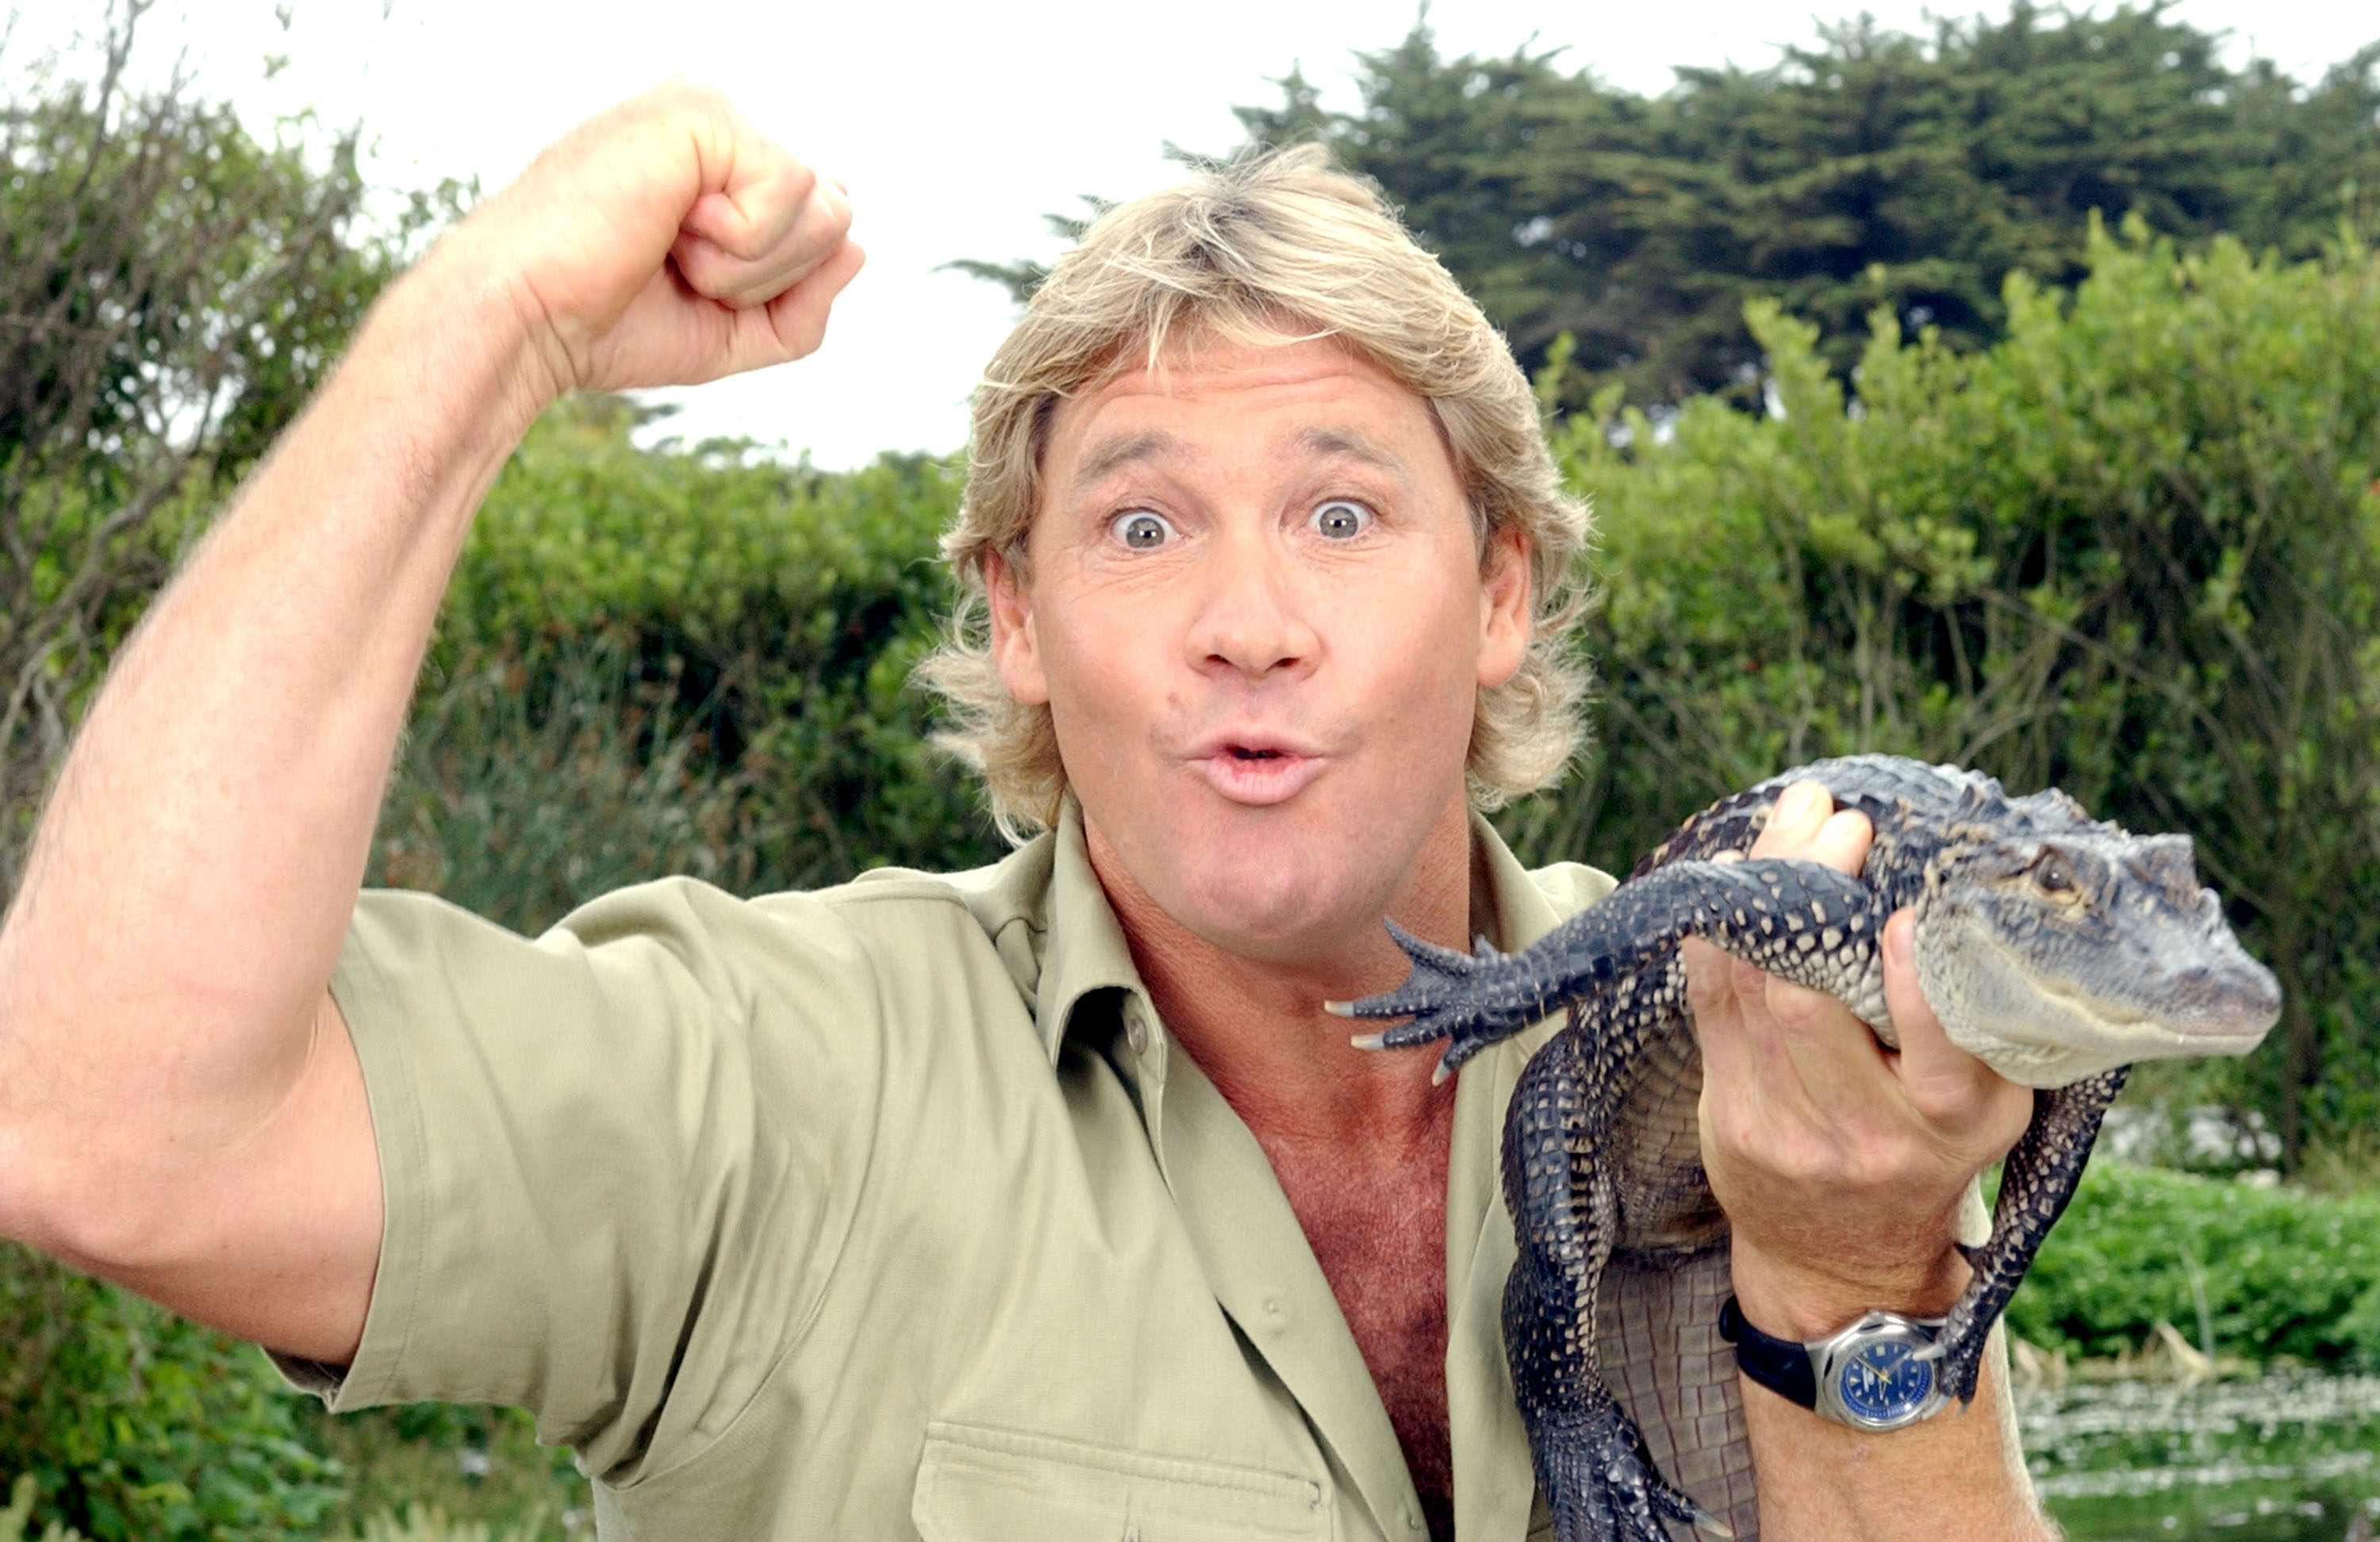 Steve Irwin posing for a picture with a crocodile in San Francisco, California on June 26, 2002 | Source: Getty Images